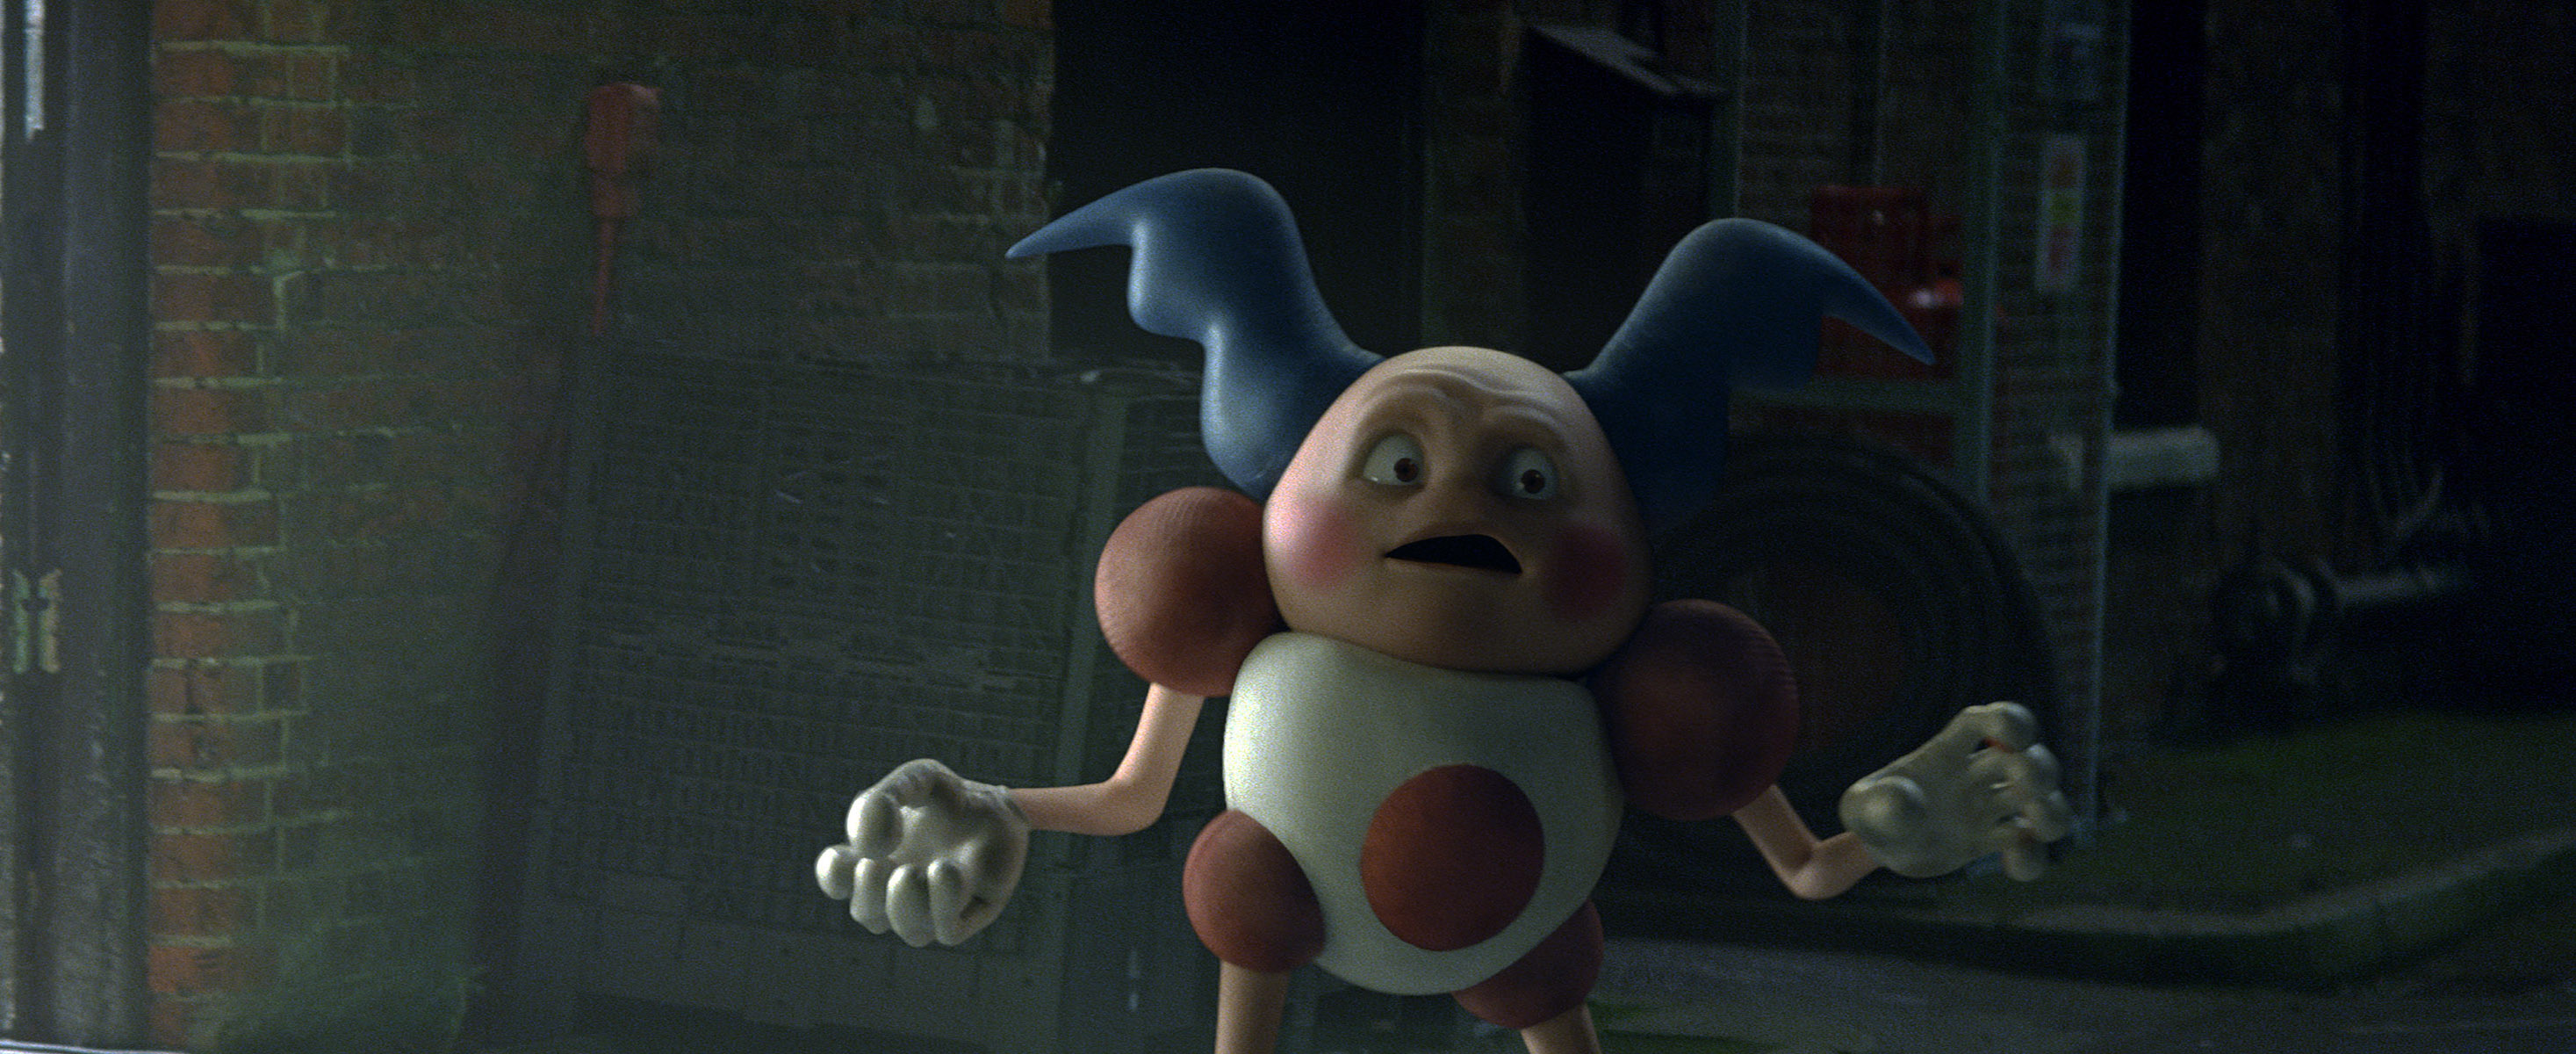 Mr. Mime in "Detective Pikacu." (Courtesy of Warner Bros. Pictures)